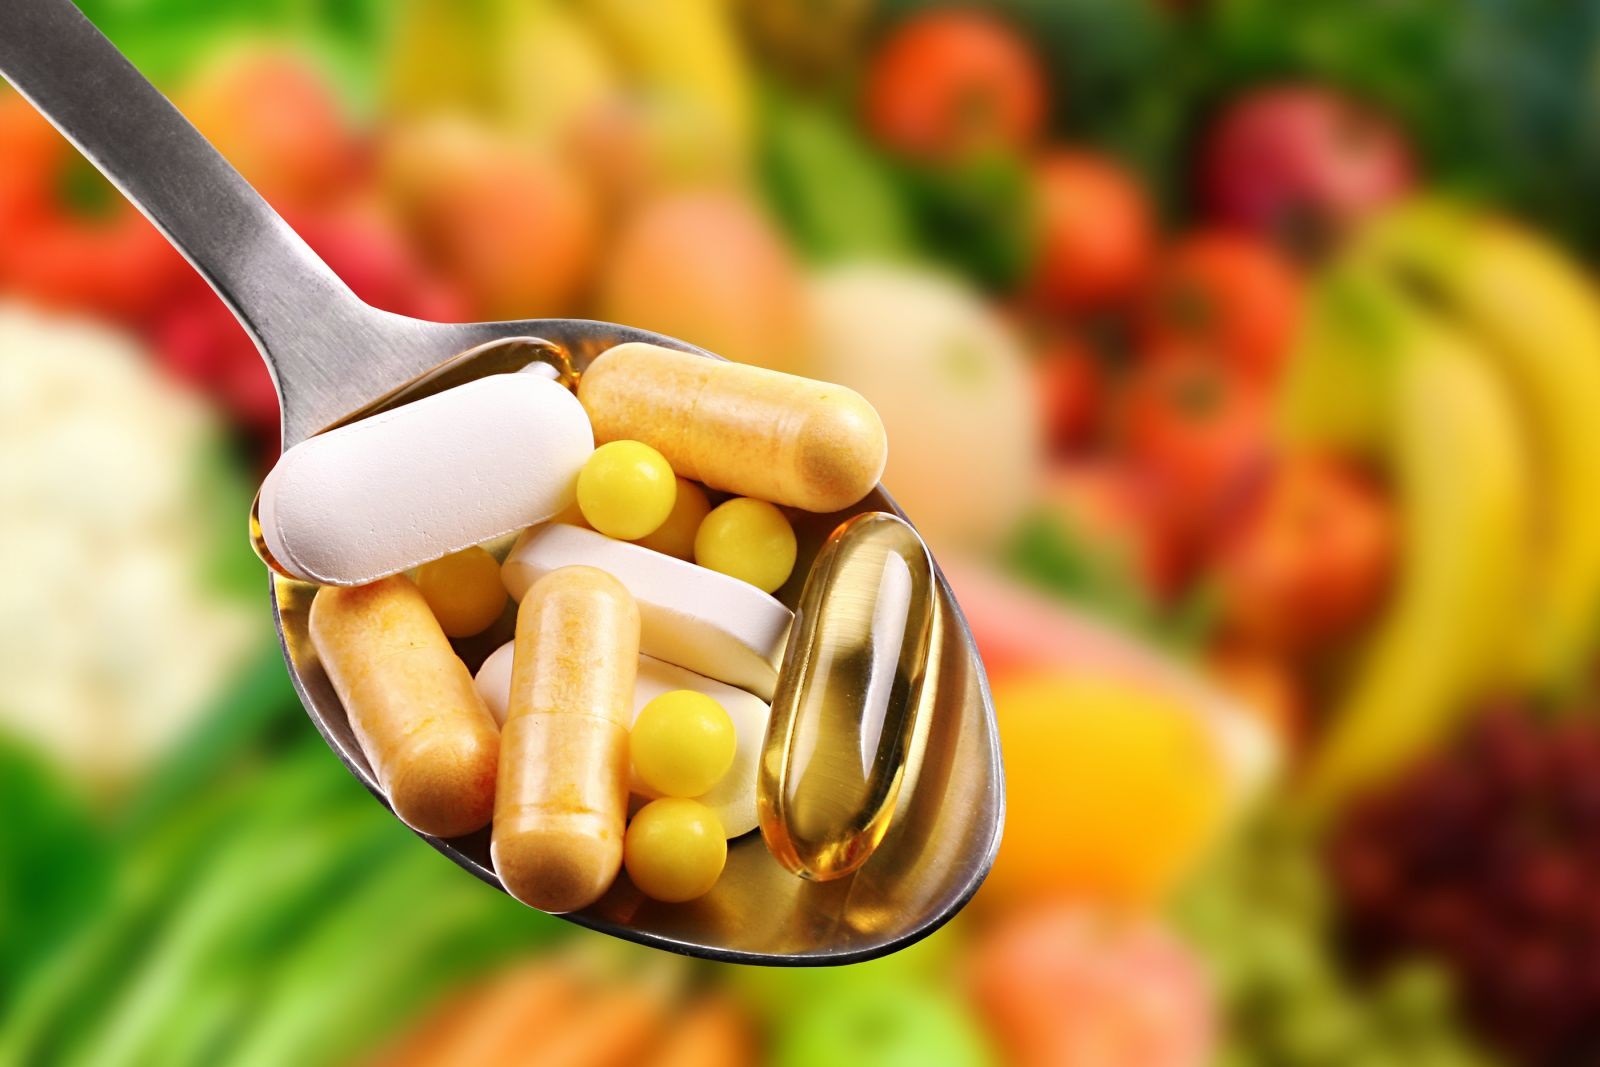 Knowing about vitamins and supplements in virtual stores